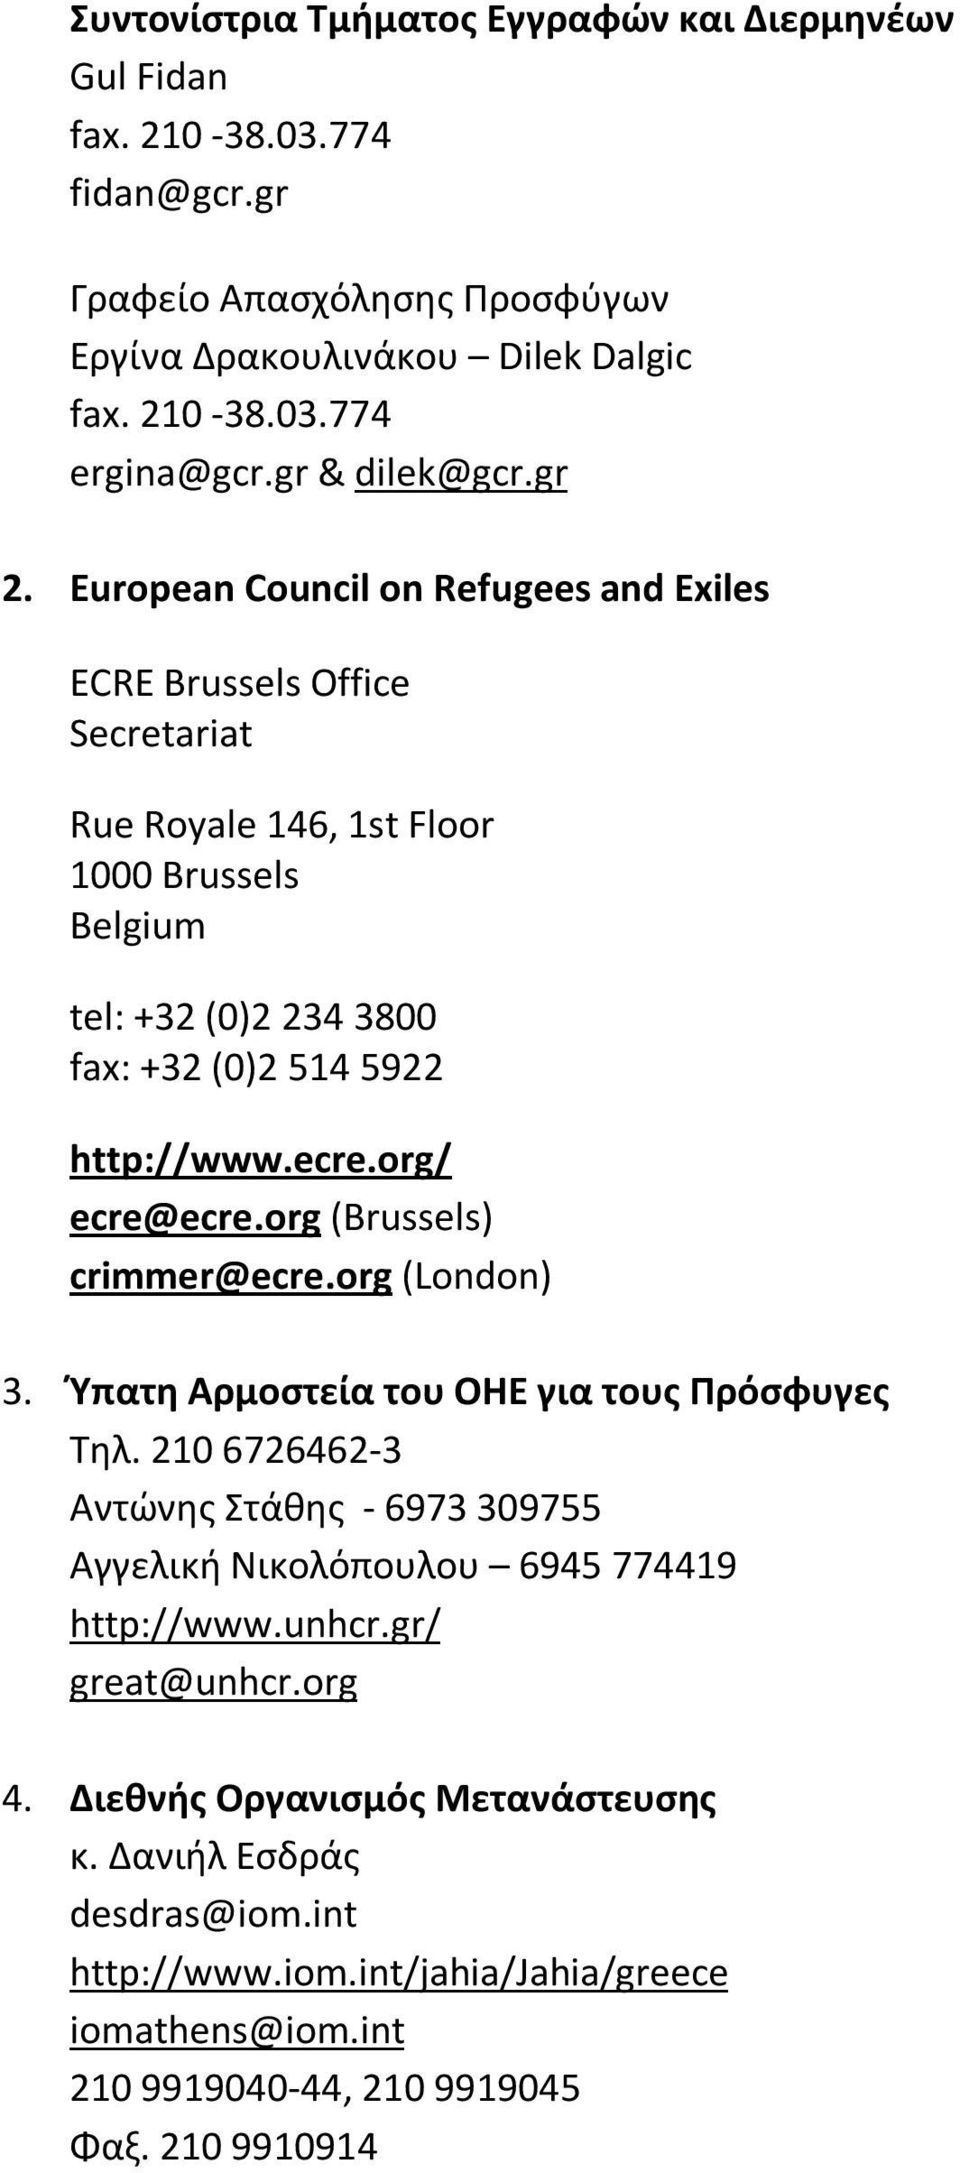 European Council on Refugees and Exiles ECRE Brussels Office Secretariat Rue Royale 146, 1st Floor 1000 Brussels Belgium tel: +32 (0)2 234 3800 fax: +32 (0)2 514 5922 http://www.ecre.org/ ecre@ecre.